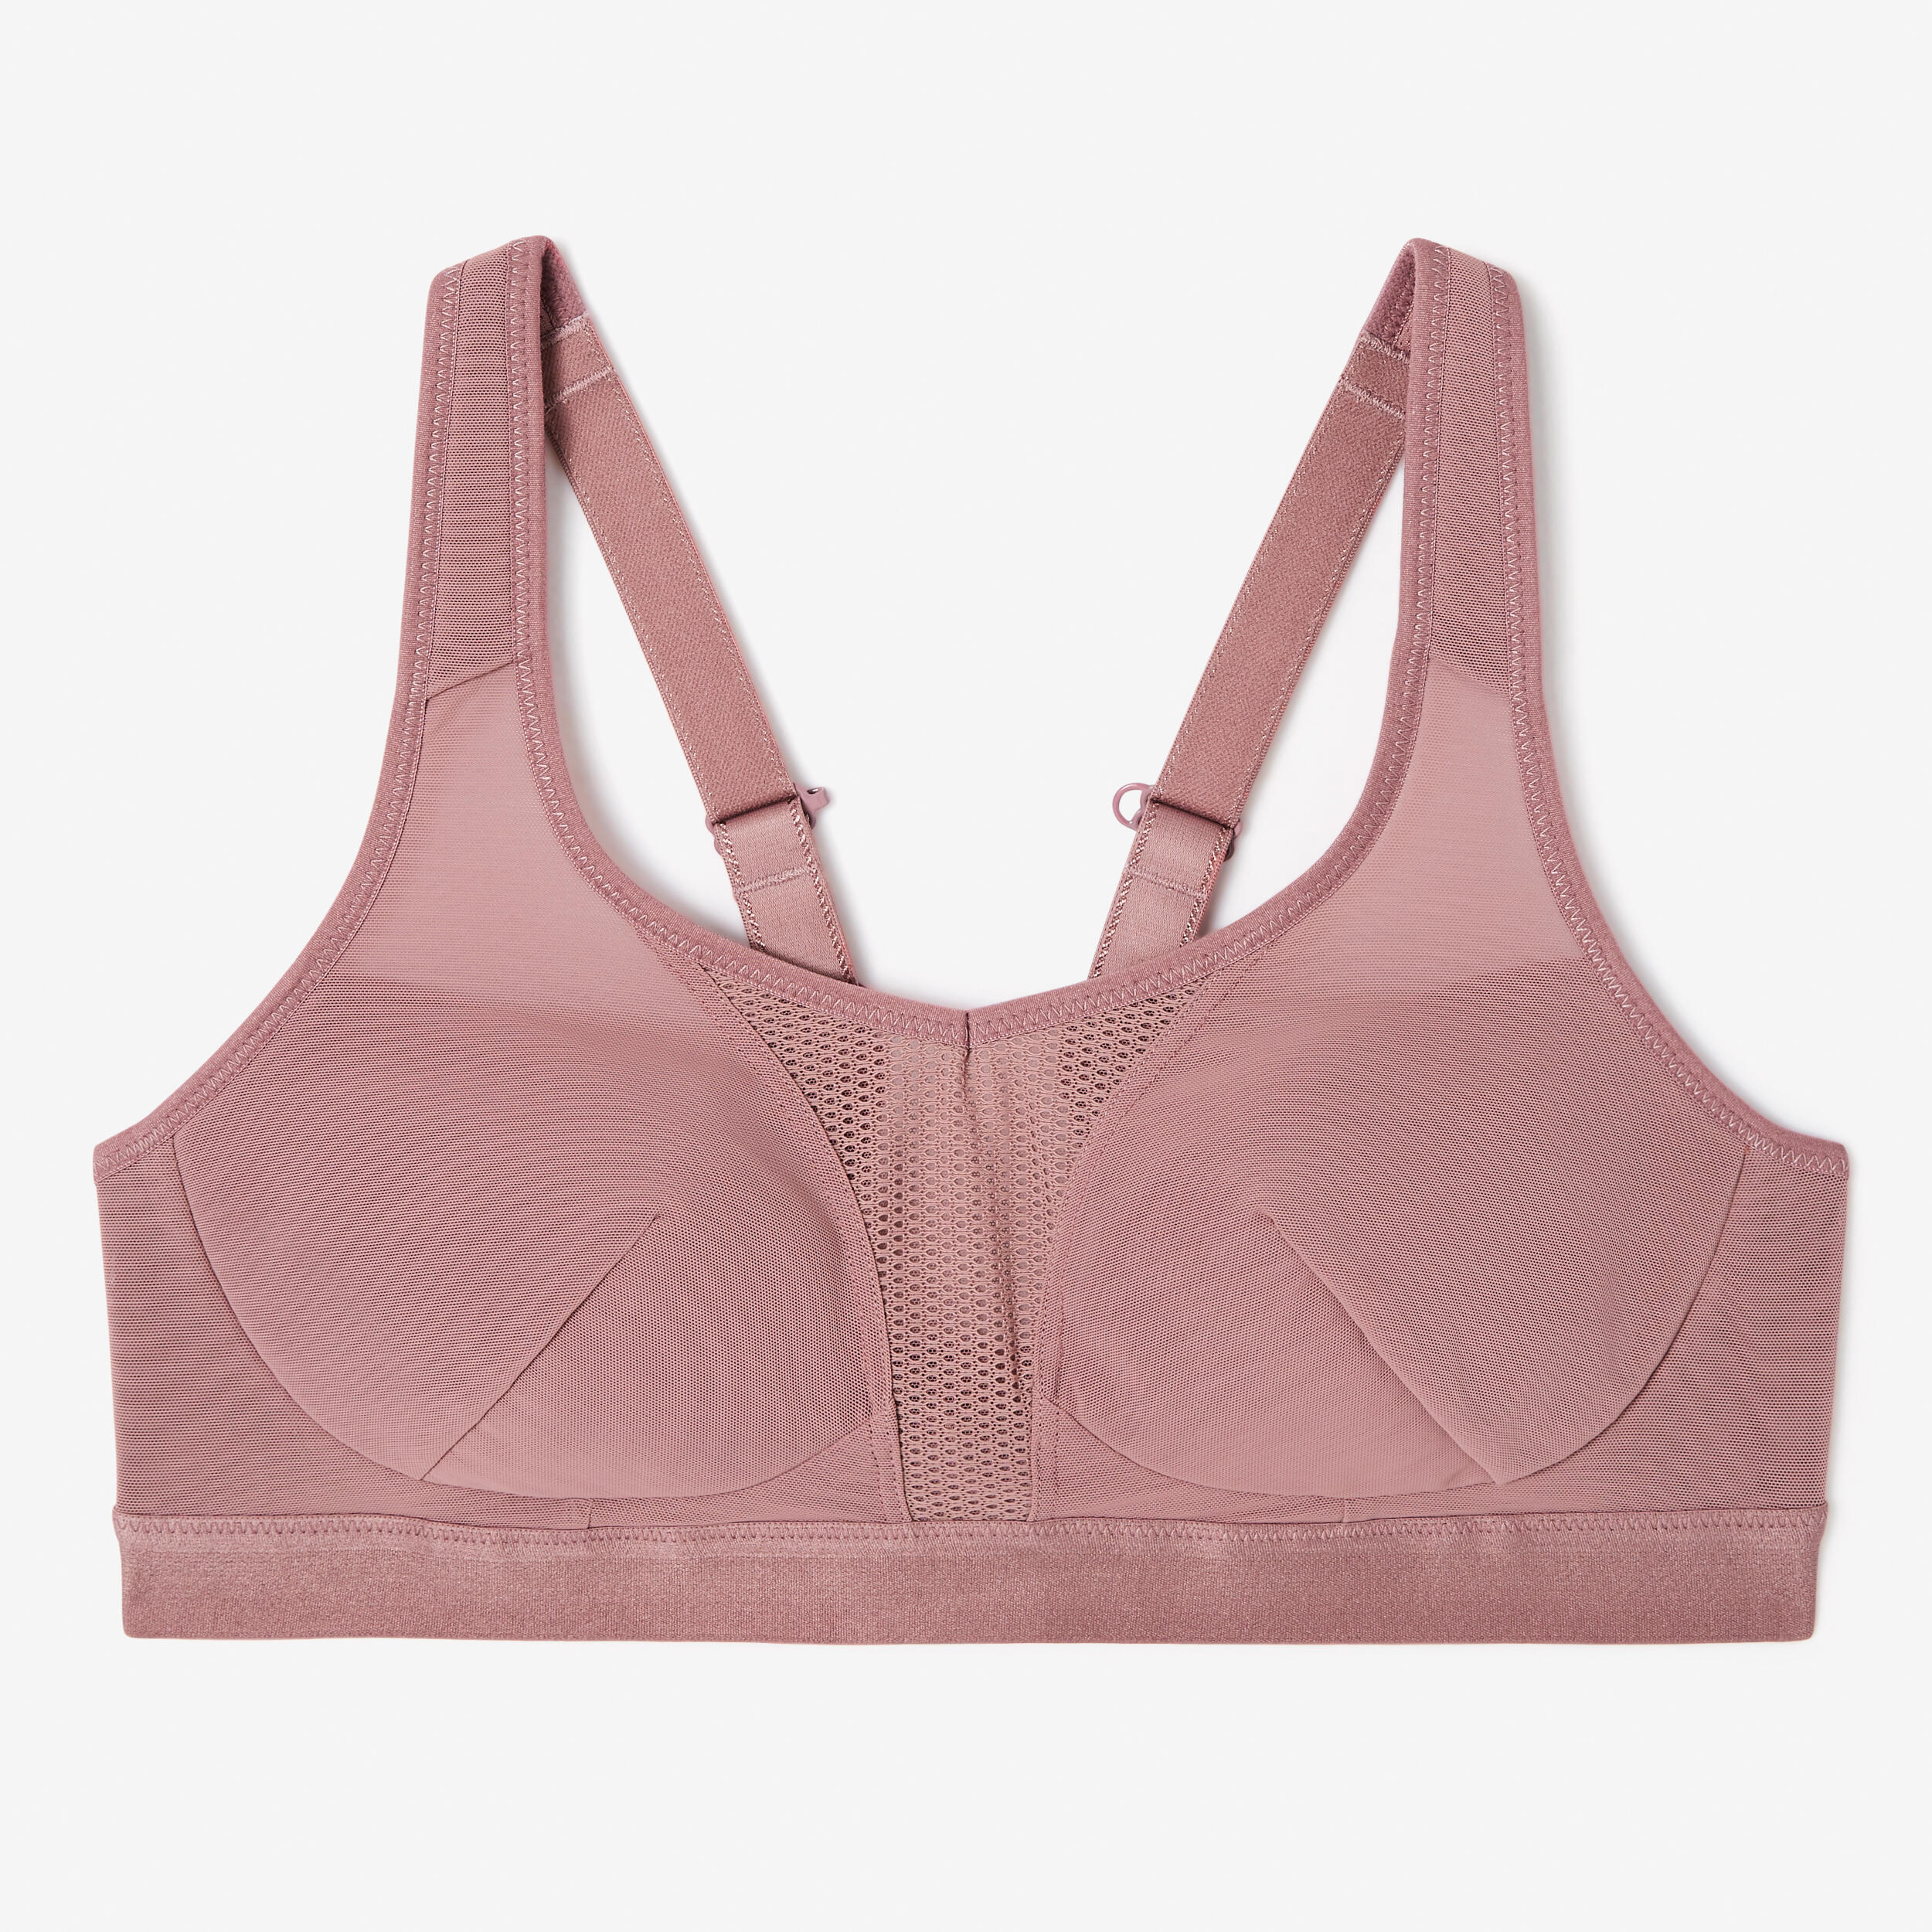 Women's High Support Bra with Crossed Straps - Taupe Pink 9/12